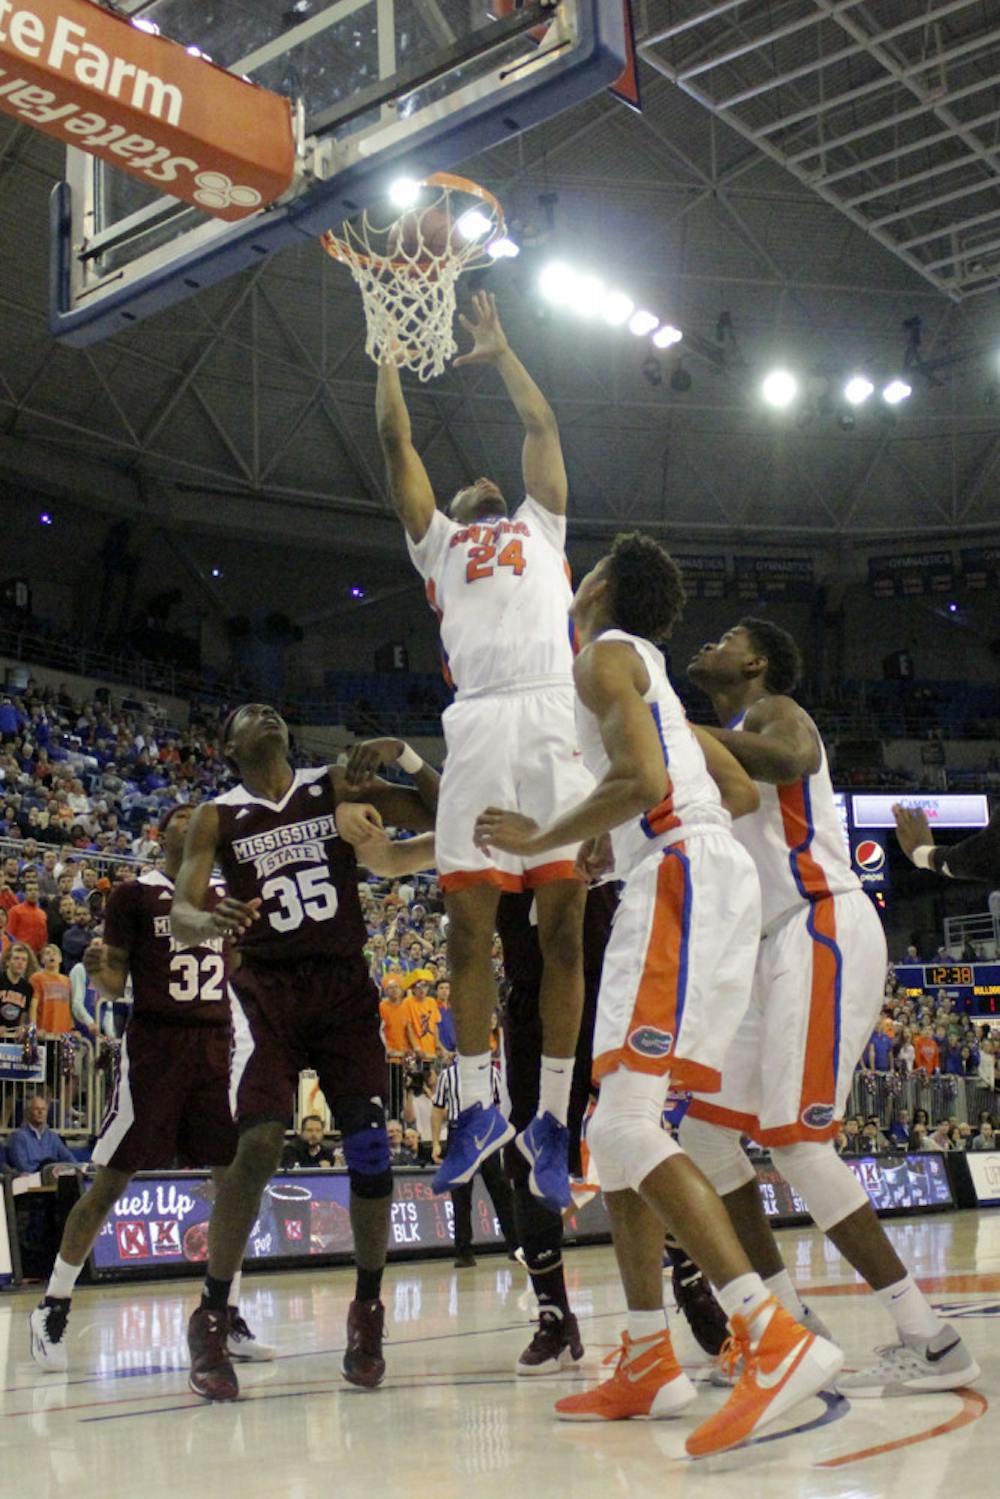 <p>UF forward Justin Leon goes up for a dunk during Florida's 81-78 win over Mississippi State on Jan. 19, 2016 in the O'Connell Center. </p>